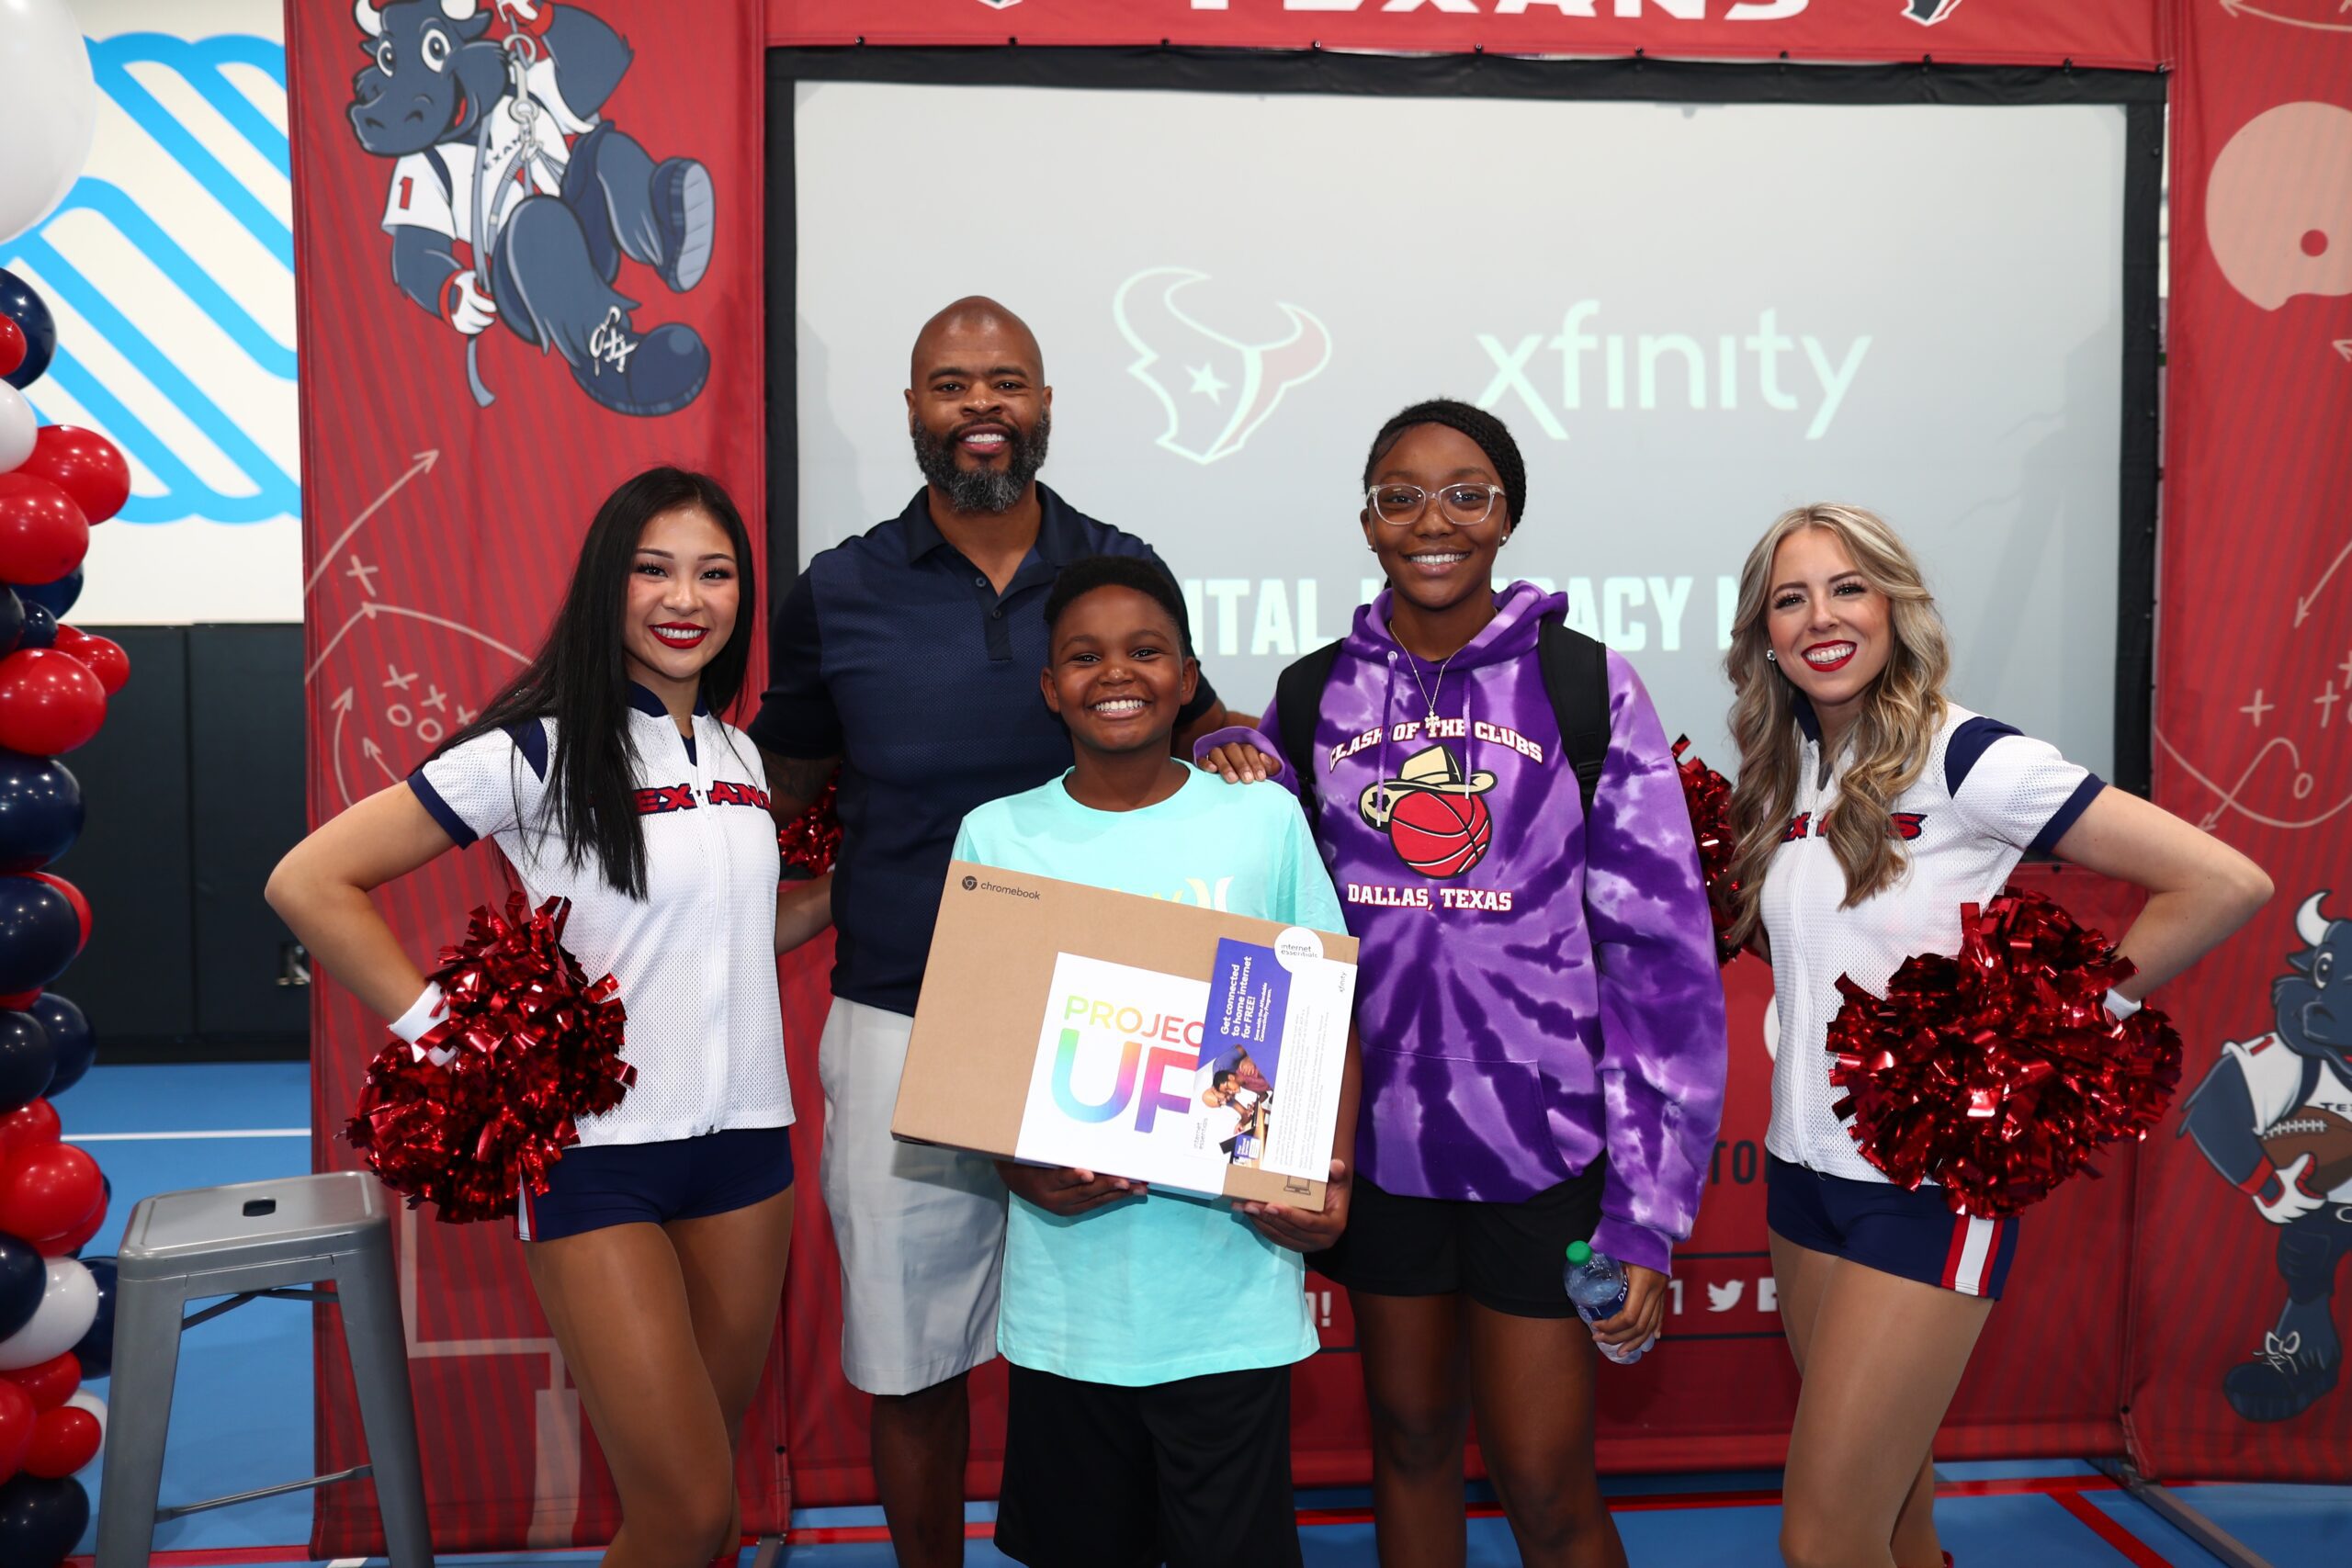 Houston Texans and Crime Stoppers Join Tech Leader to Surprise Youth, Houston Style Magazine